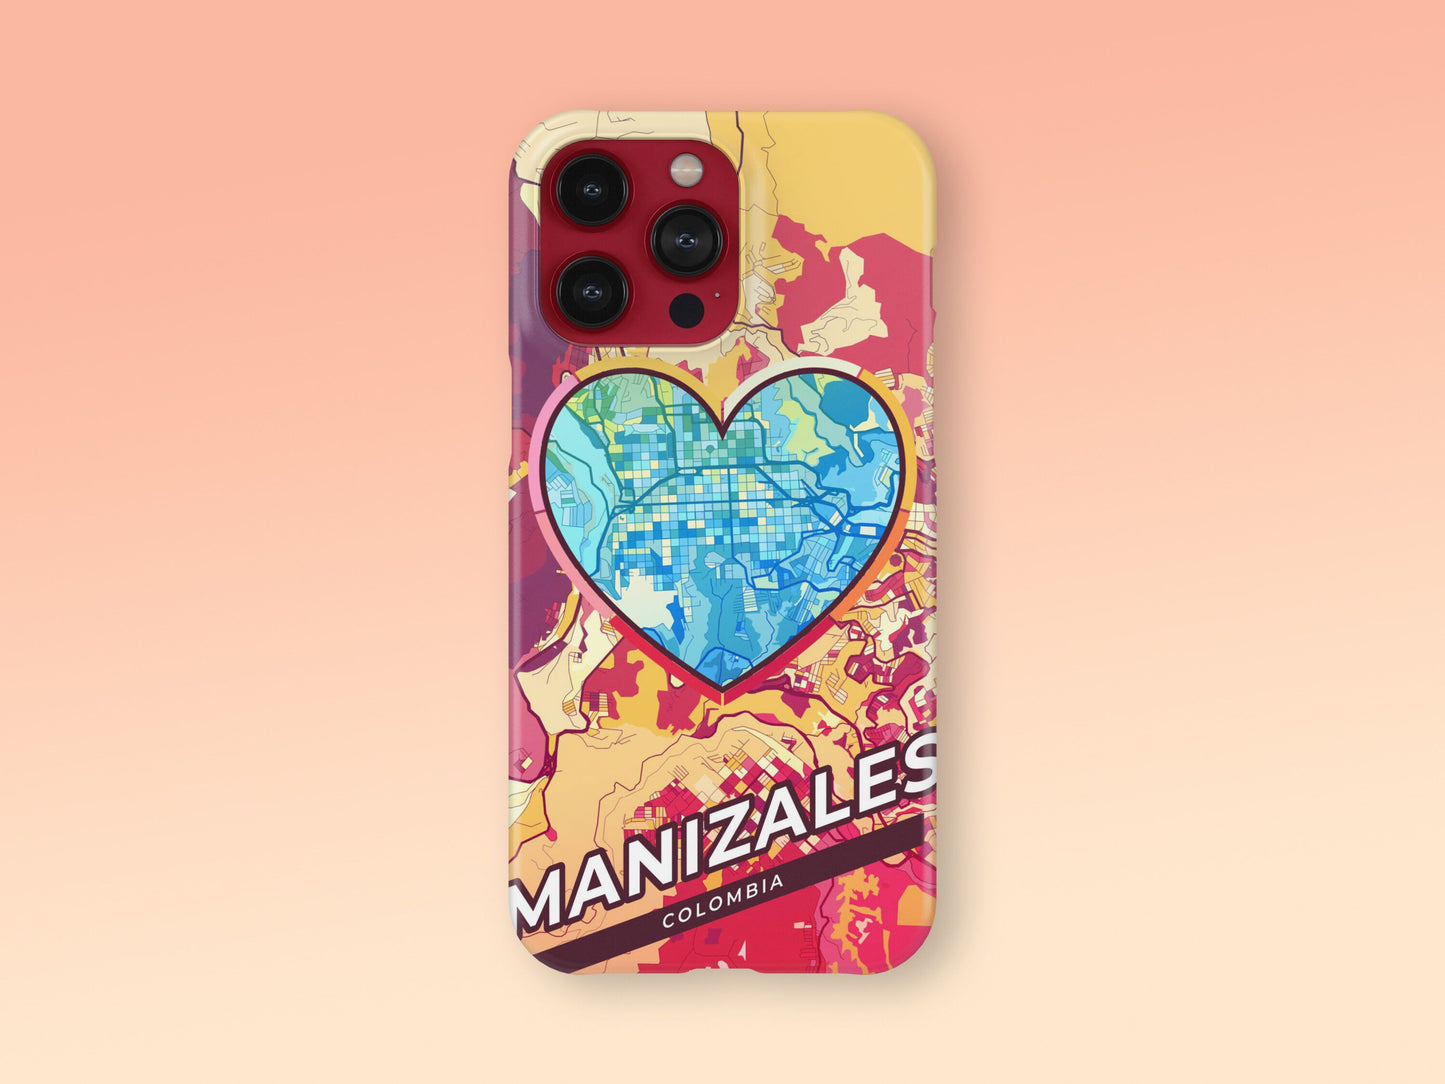 Manizales Colombia slim phone case with colorful icon. Birthday, wedding or housewarming gift. Couple match cases. 2